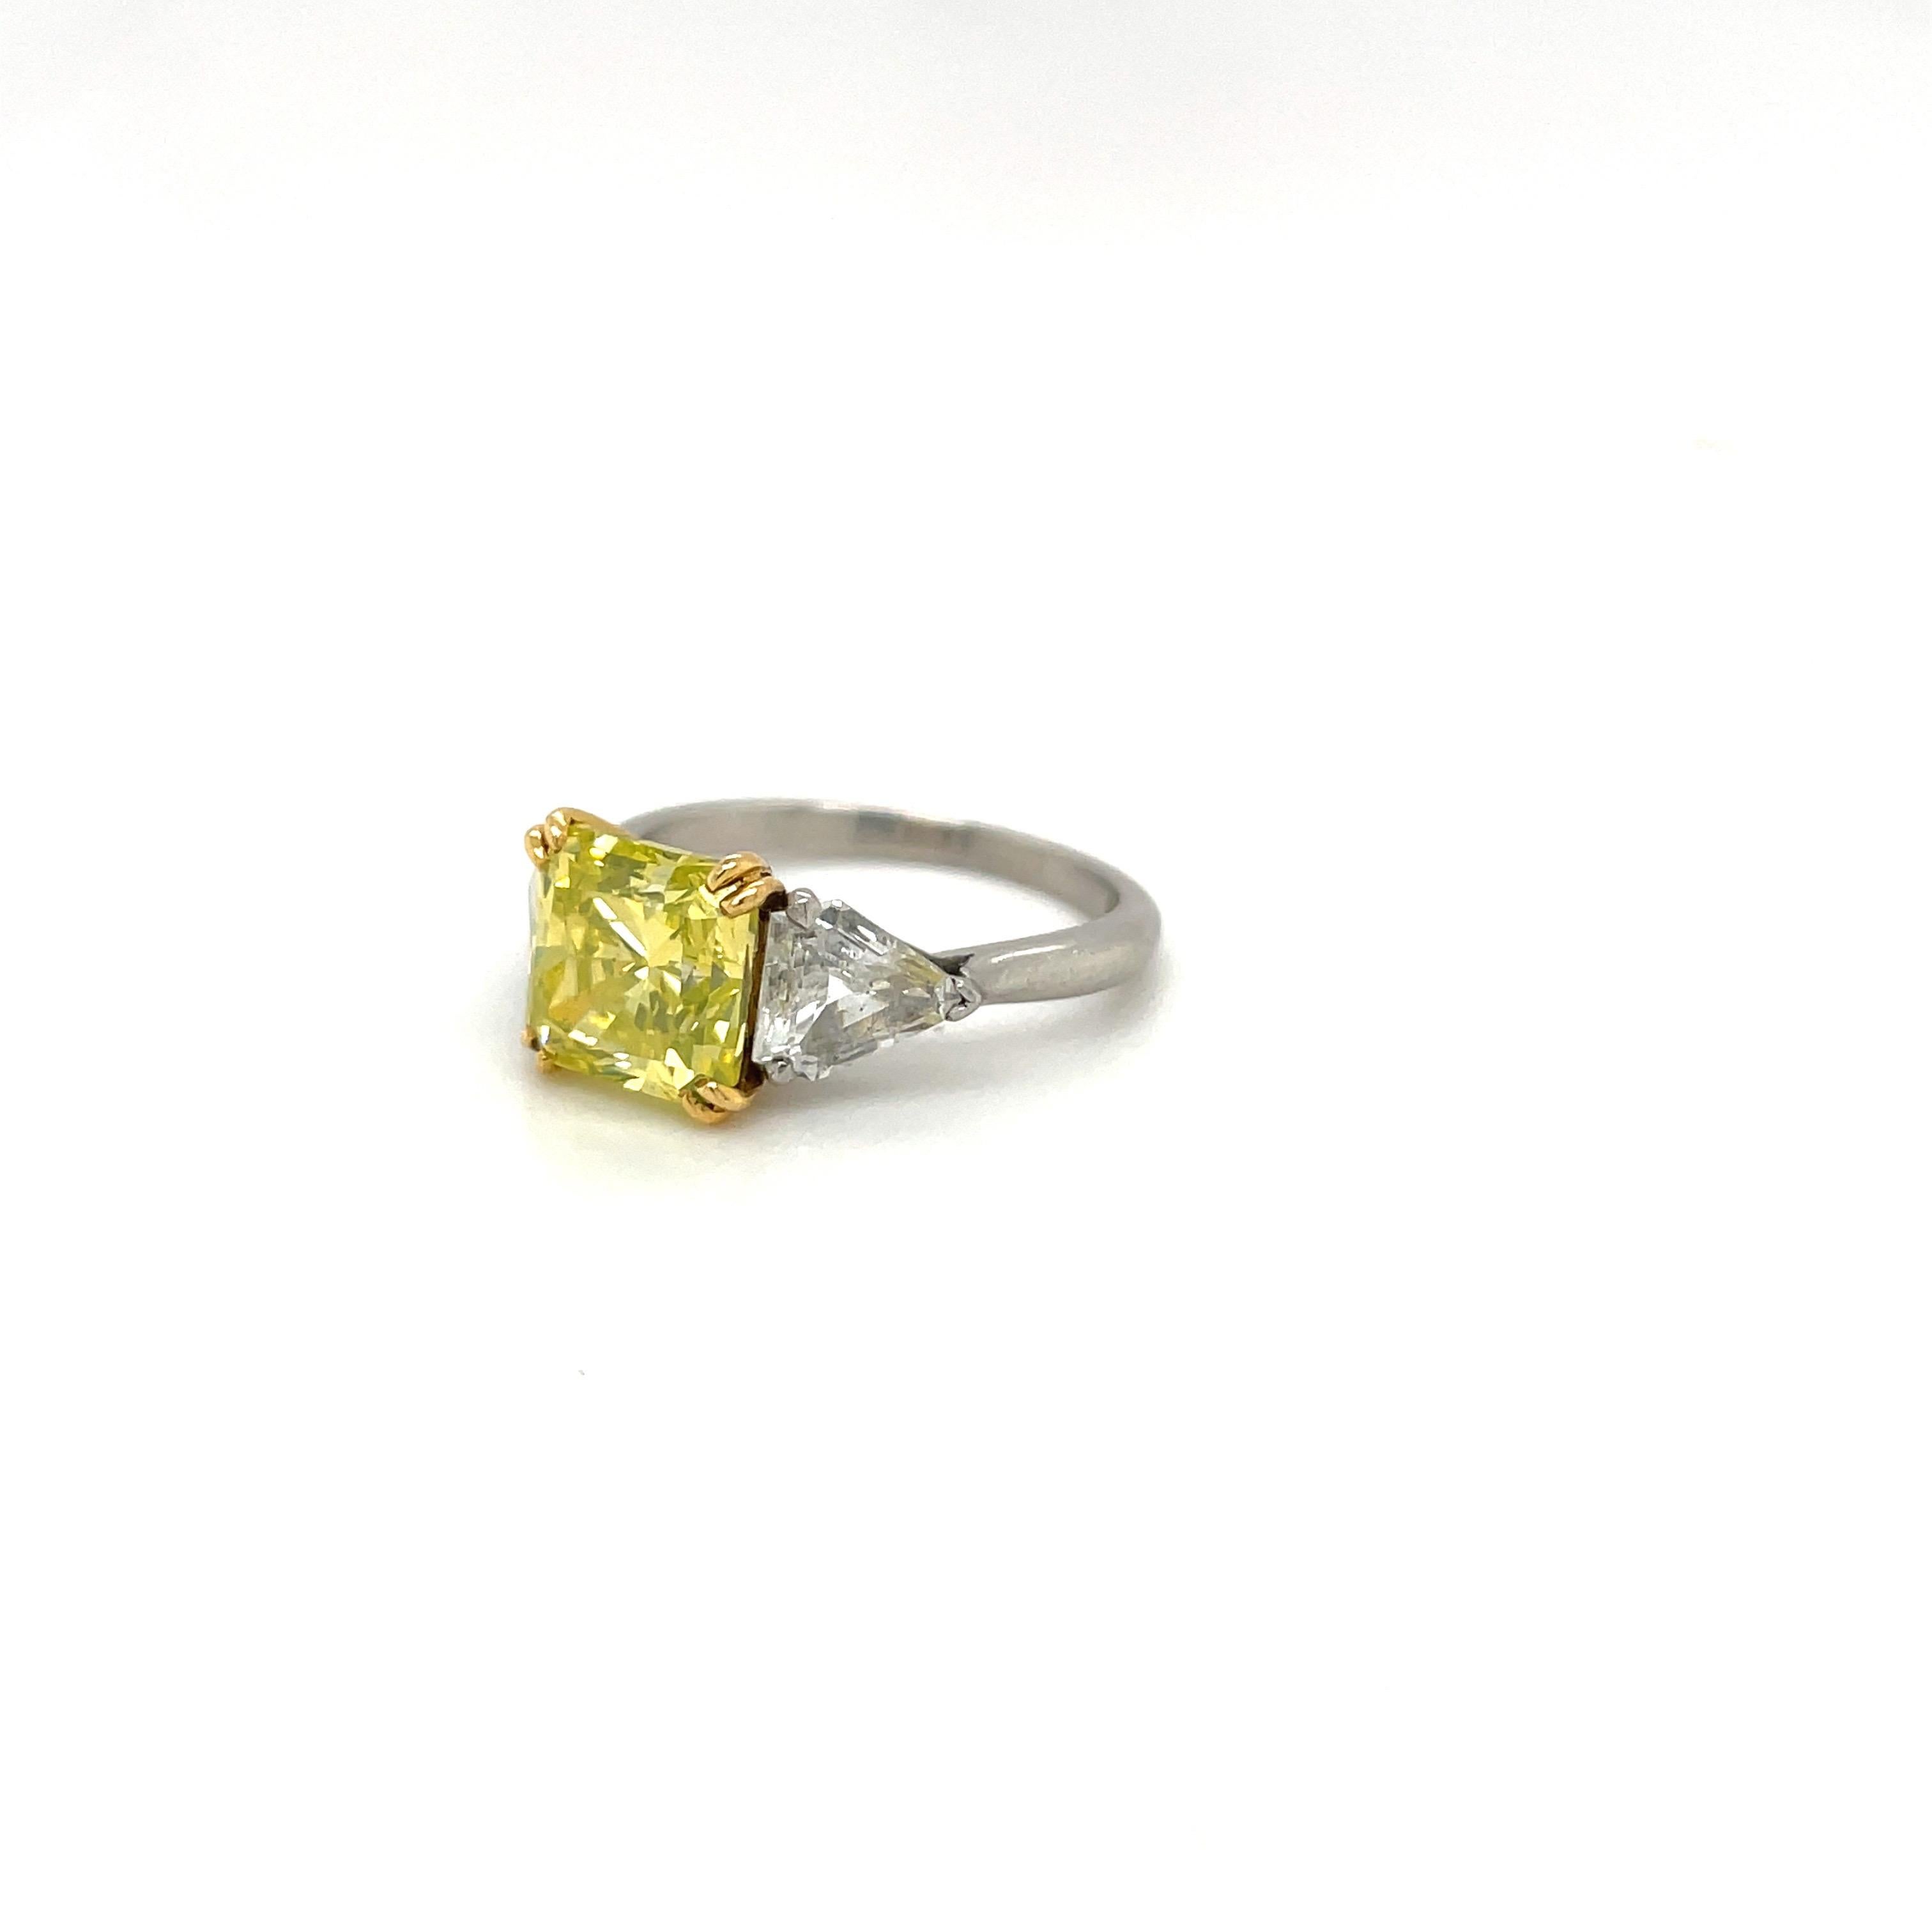 Rare, natural fancy intense green-yellow radiant-cut diamond mounted with kite-cut white diamond side stones. Set in platinum and 18-karat yellow gold.
Center diamond weight: 3.06 carats.
White diamond weight: 0.91cts 
Ring size 6 
Appraisal and